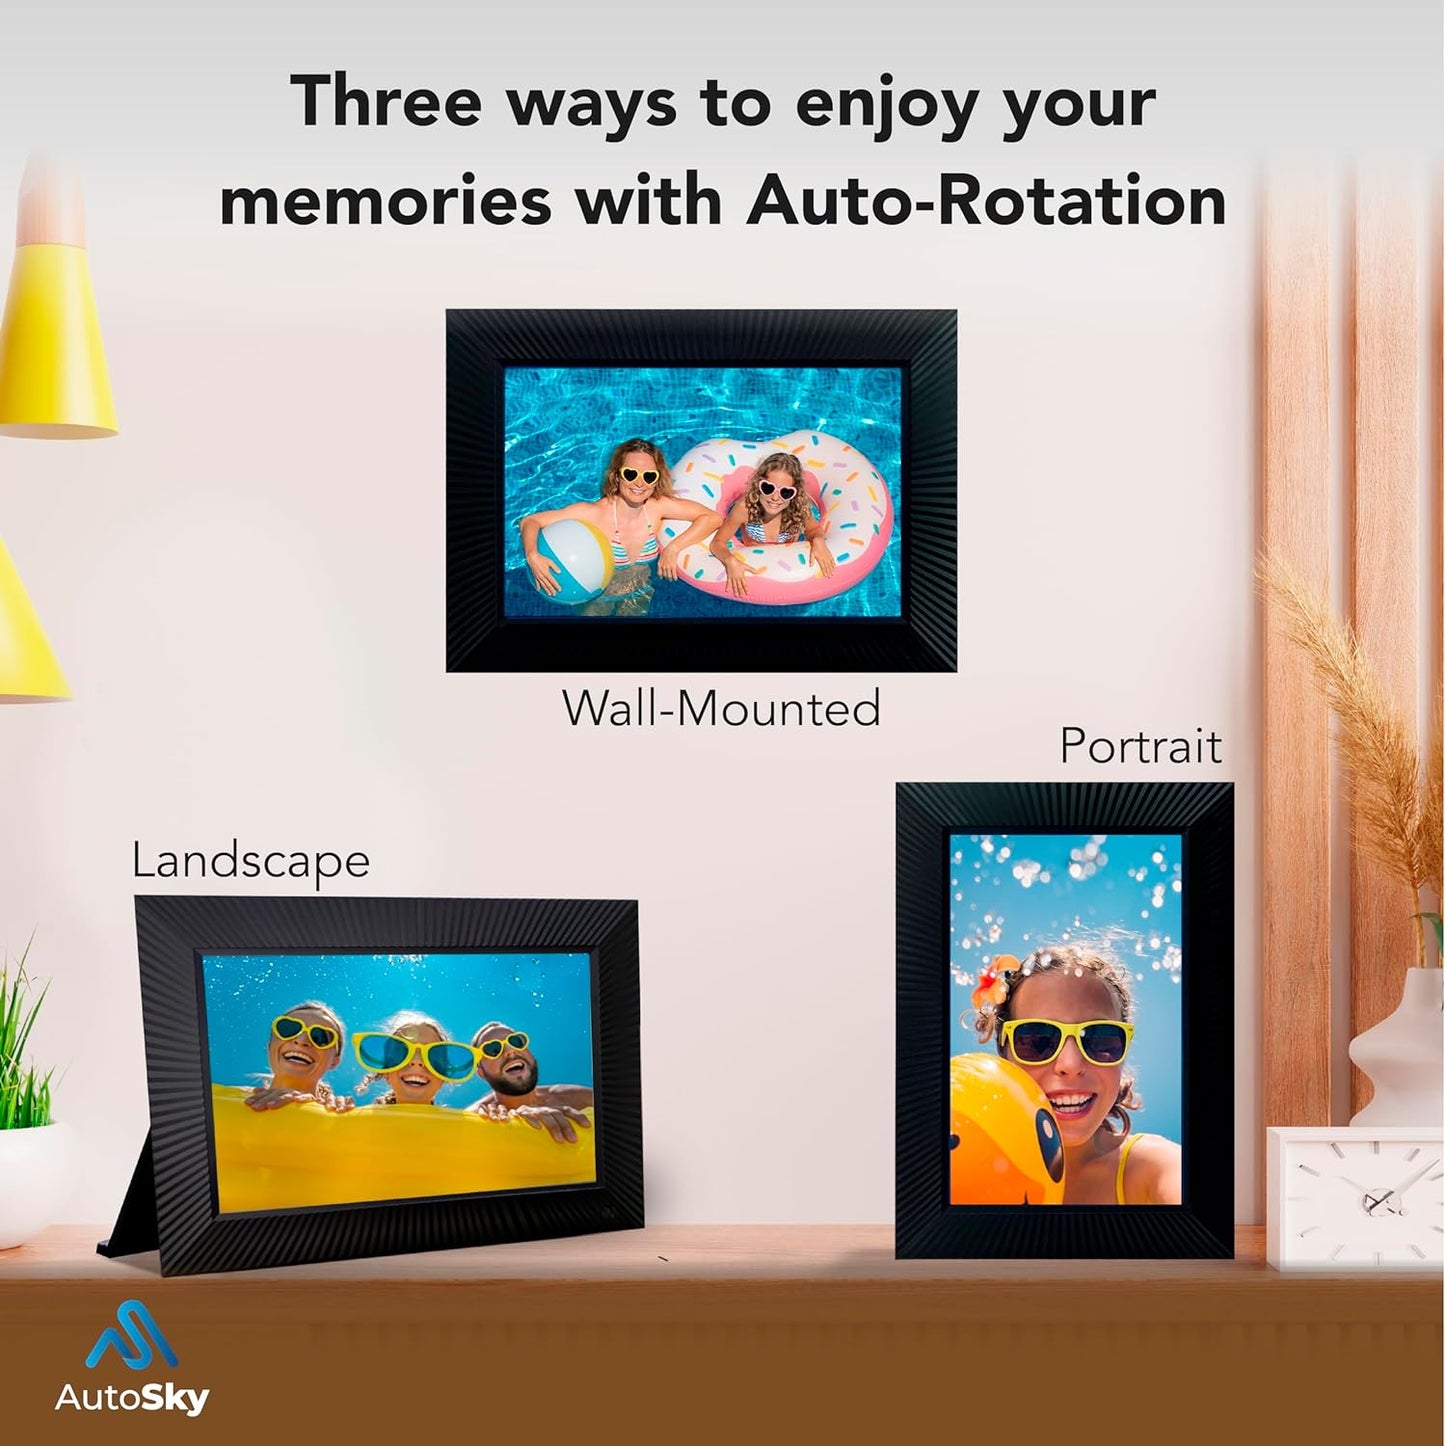 AutoSky WiFi Digital Photo Frame 10.1 Inch IPS Touchscreen Electronic Photo Frame with 32GB Digital Picture Frames Share Photos Videos Music Calendar Alarm Auto Rotate Decor Gift ADF-777